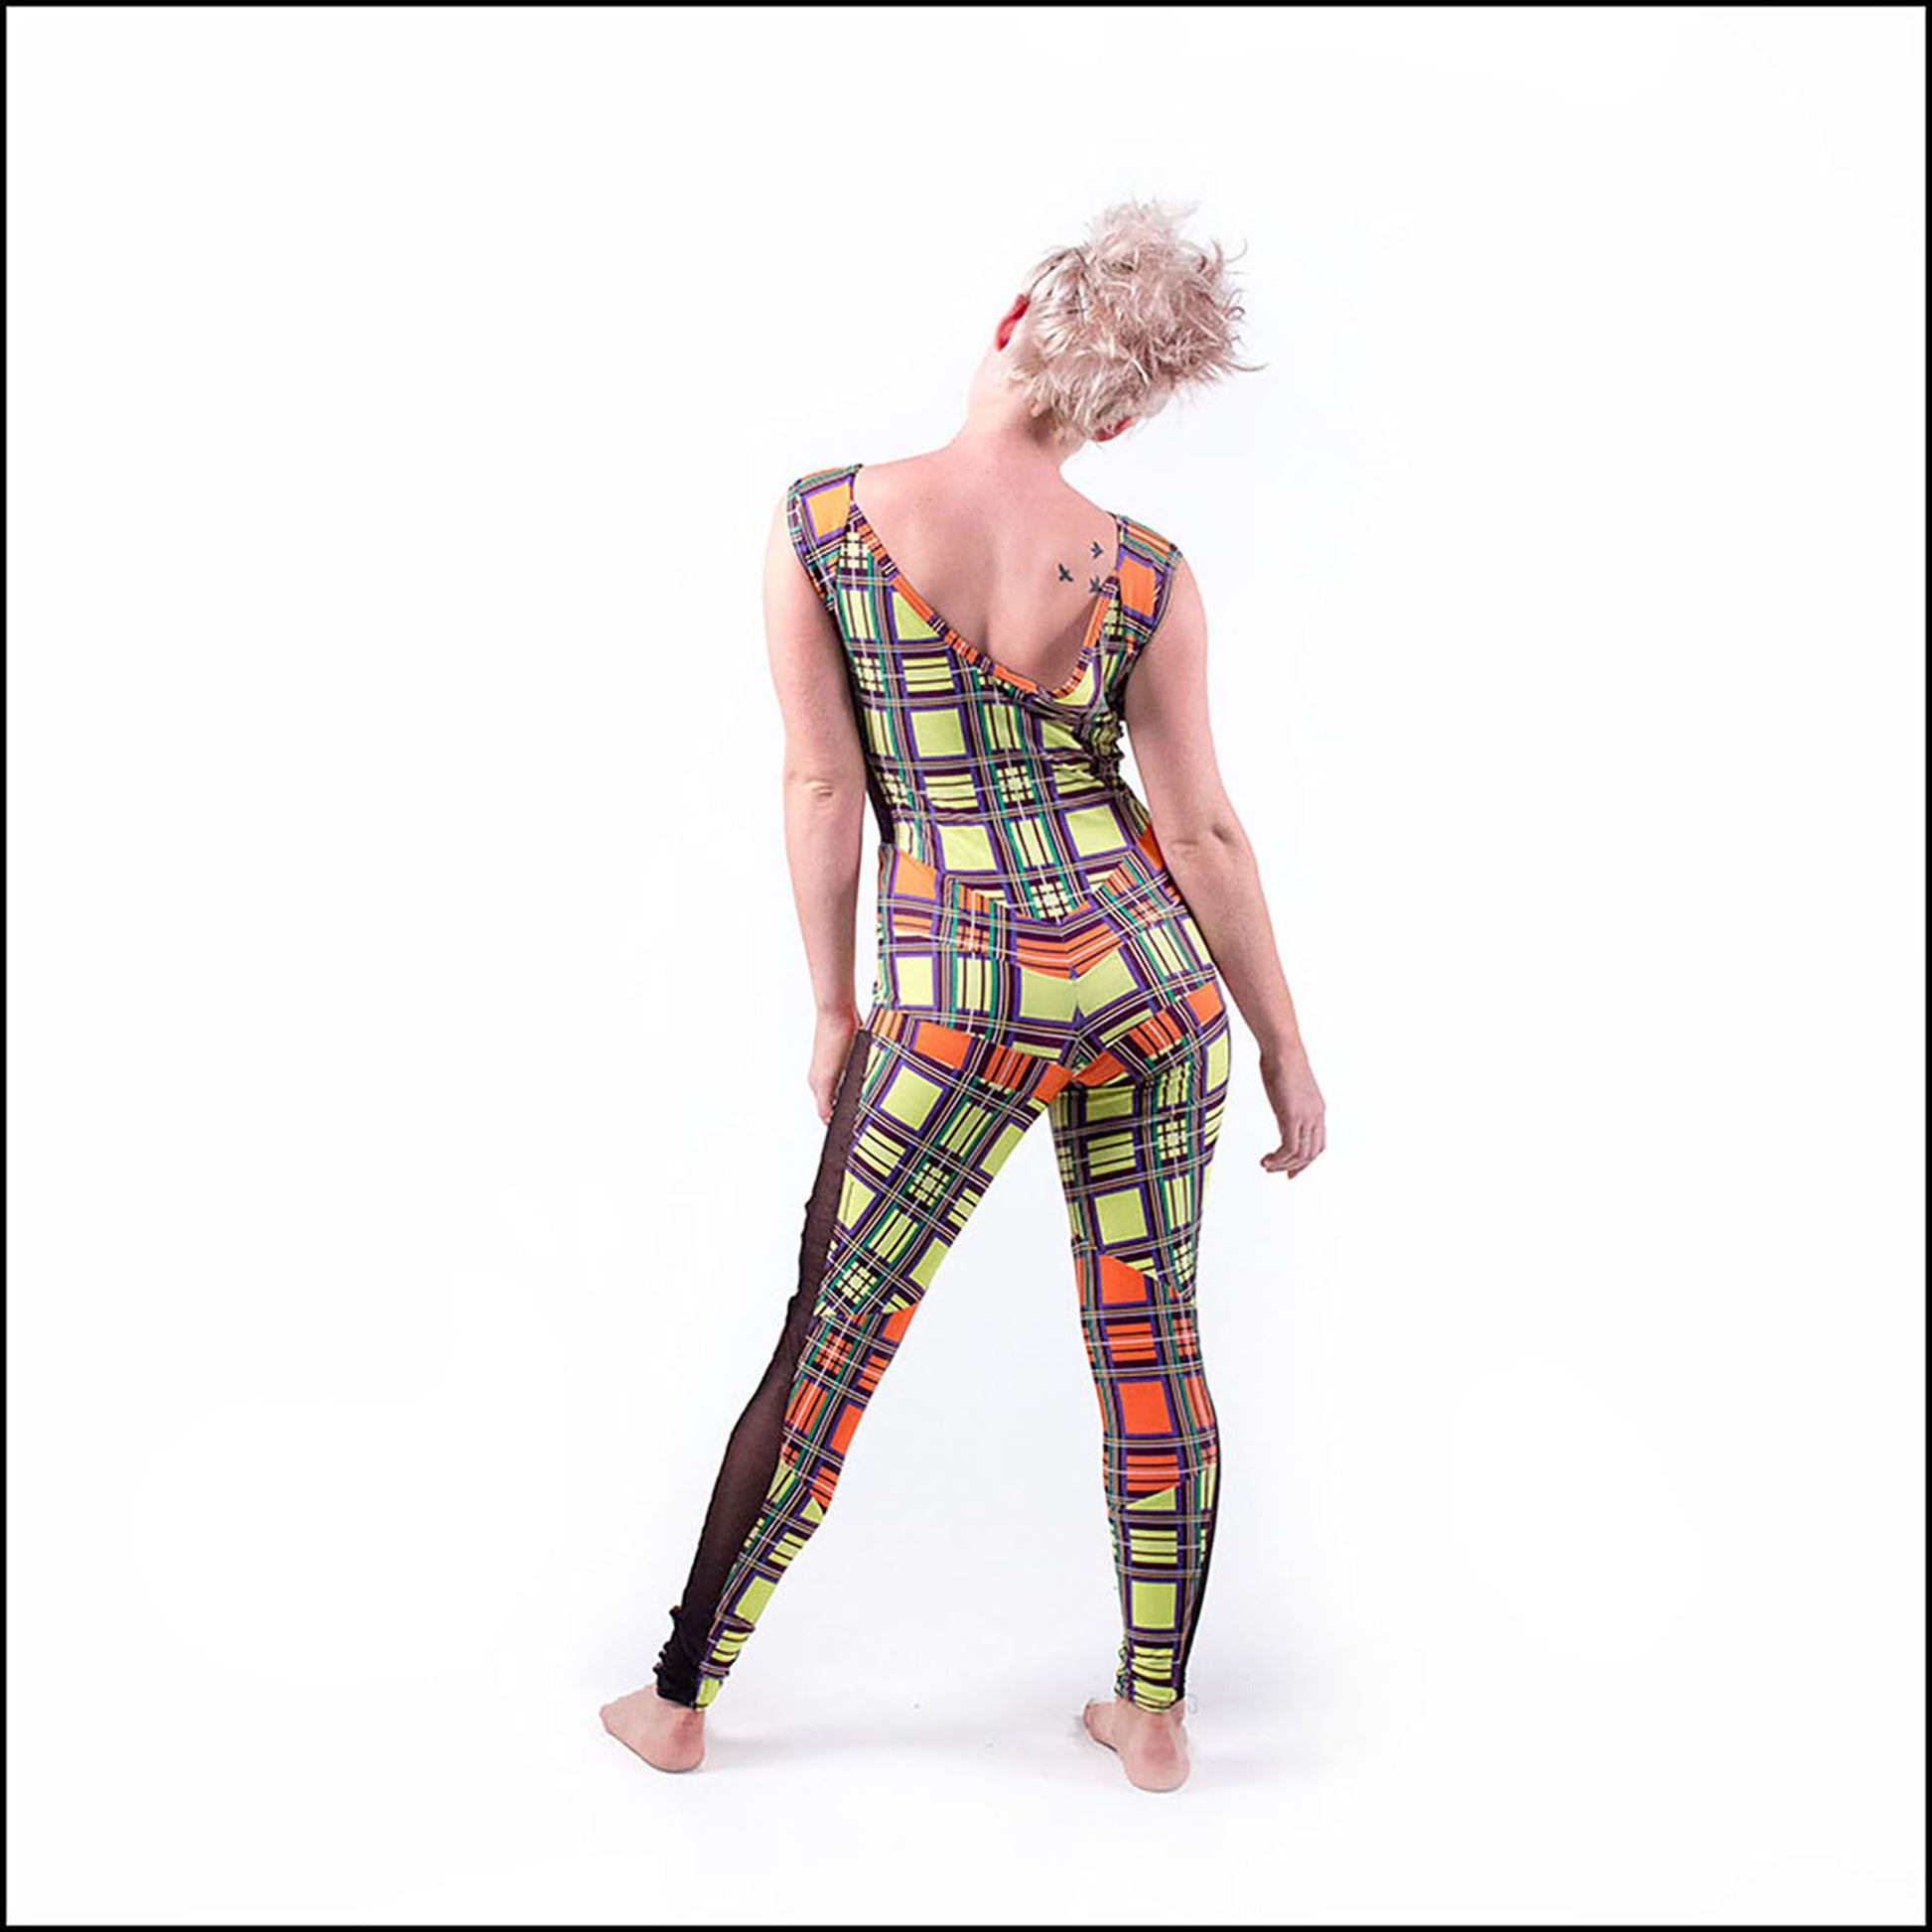 Neon Tartan Catsuit, a handmade-to-order piece in yellow and orange neon tartan printed spandex. This statement catsuit is both stylish and sustainable. The reversible design features a square mesh front neck and v-shaped back neck (for the style reversed see the Mardi Gras Catsuit). It includes black mesh side panels and multiple contrast panels. 